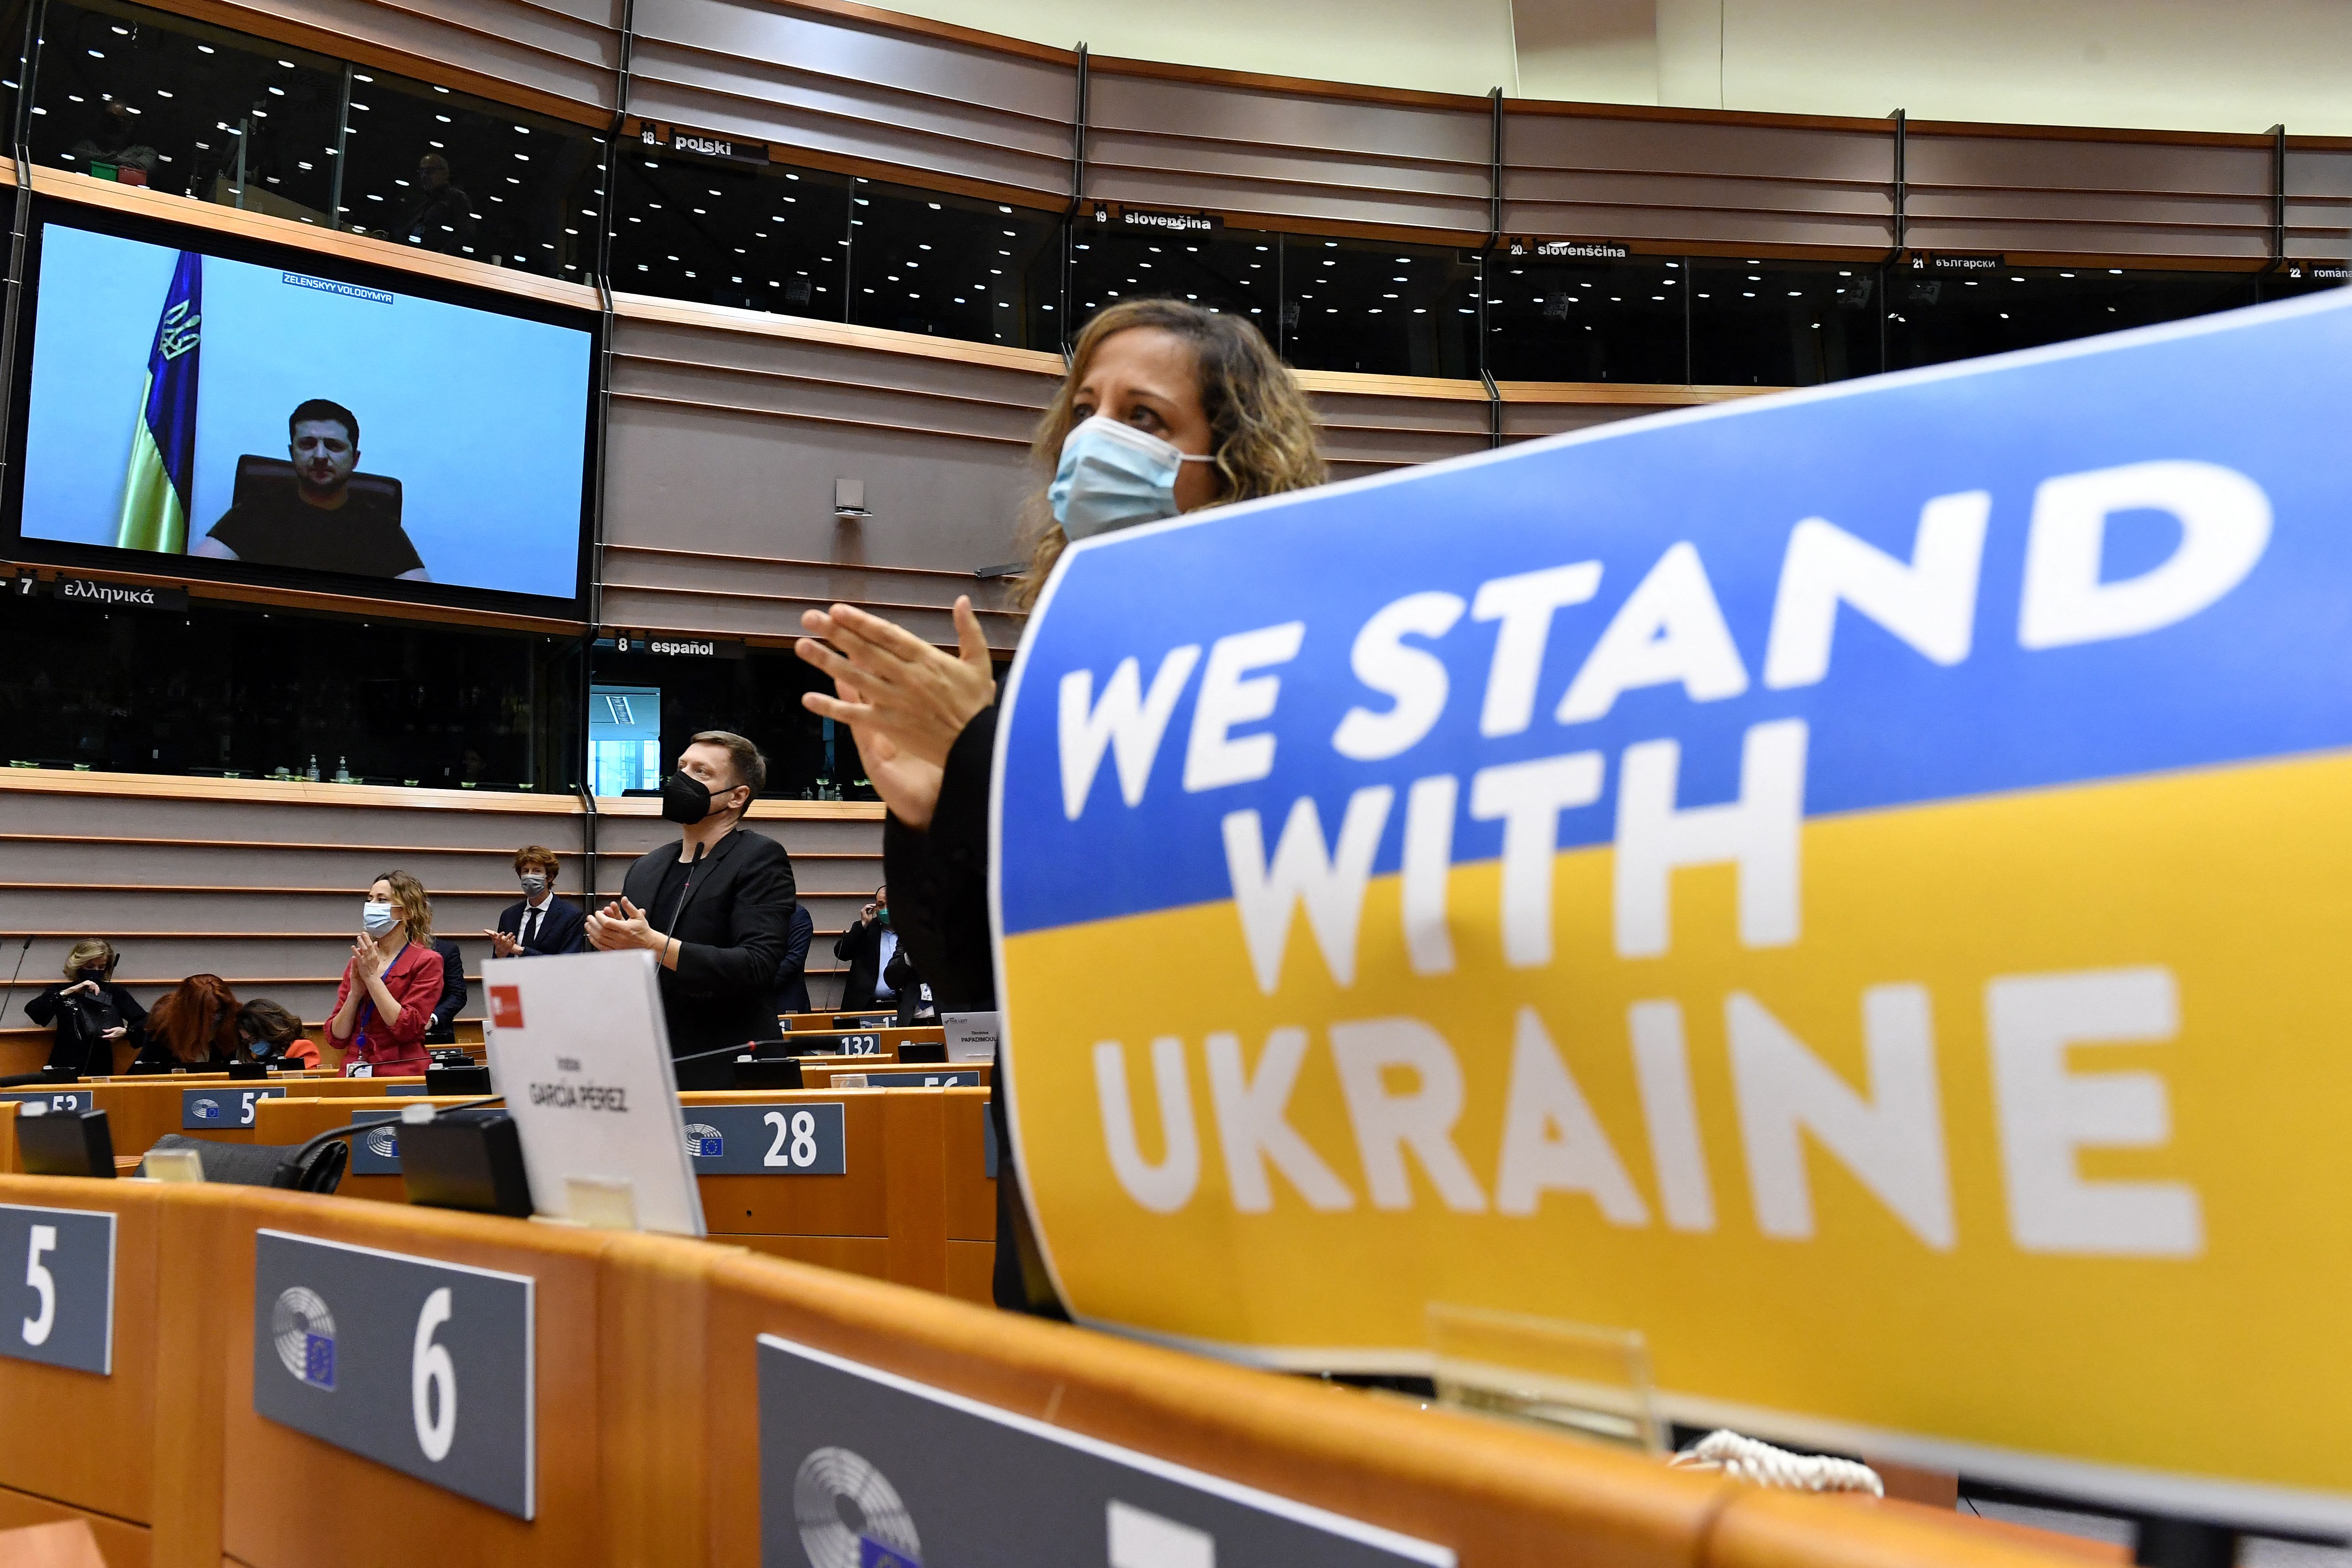 Members of the European Parliament applaud Ukrainian President Volodymyr Zelensky who appears on a screen as he speaks in a video conference during a special plenary session of the European Parliament focused on the Russian invasion of Ukraine at the EU headquarters in Brussels, on March 1.